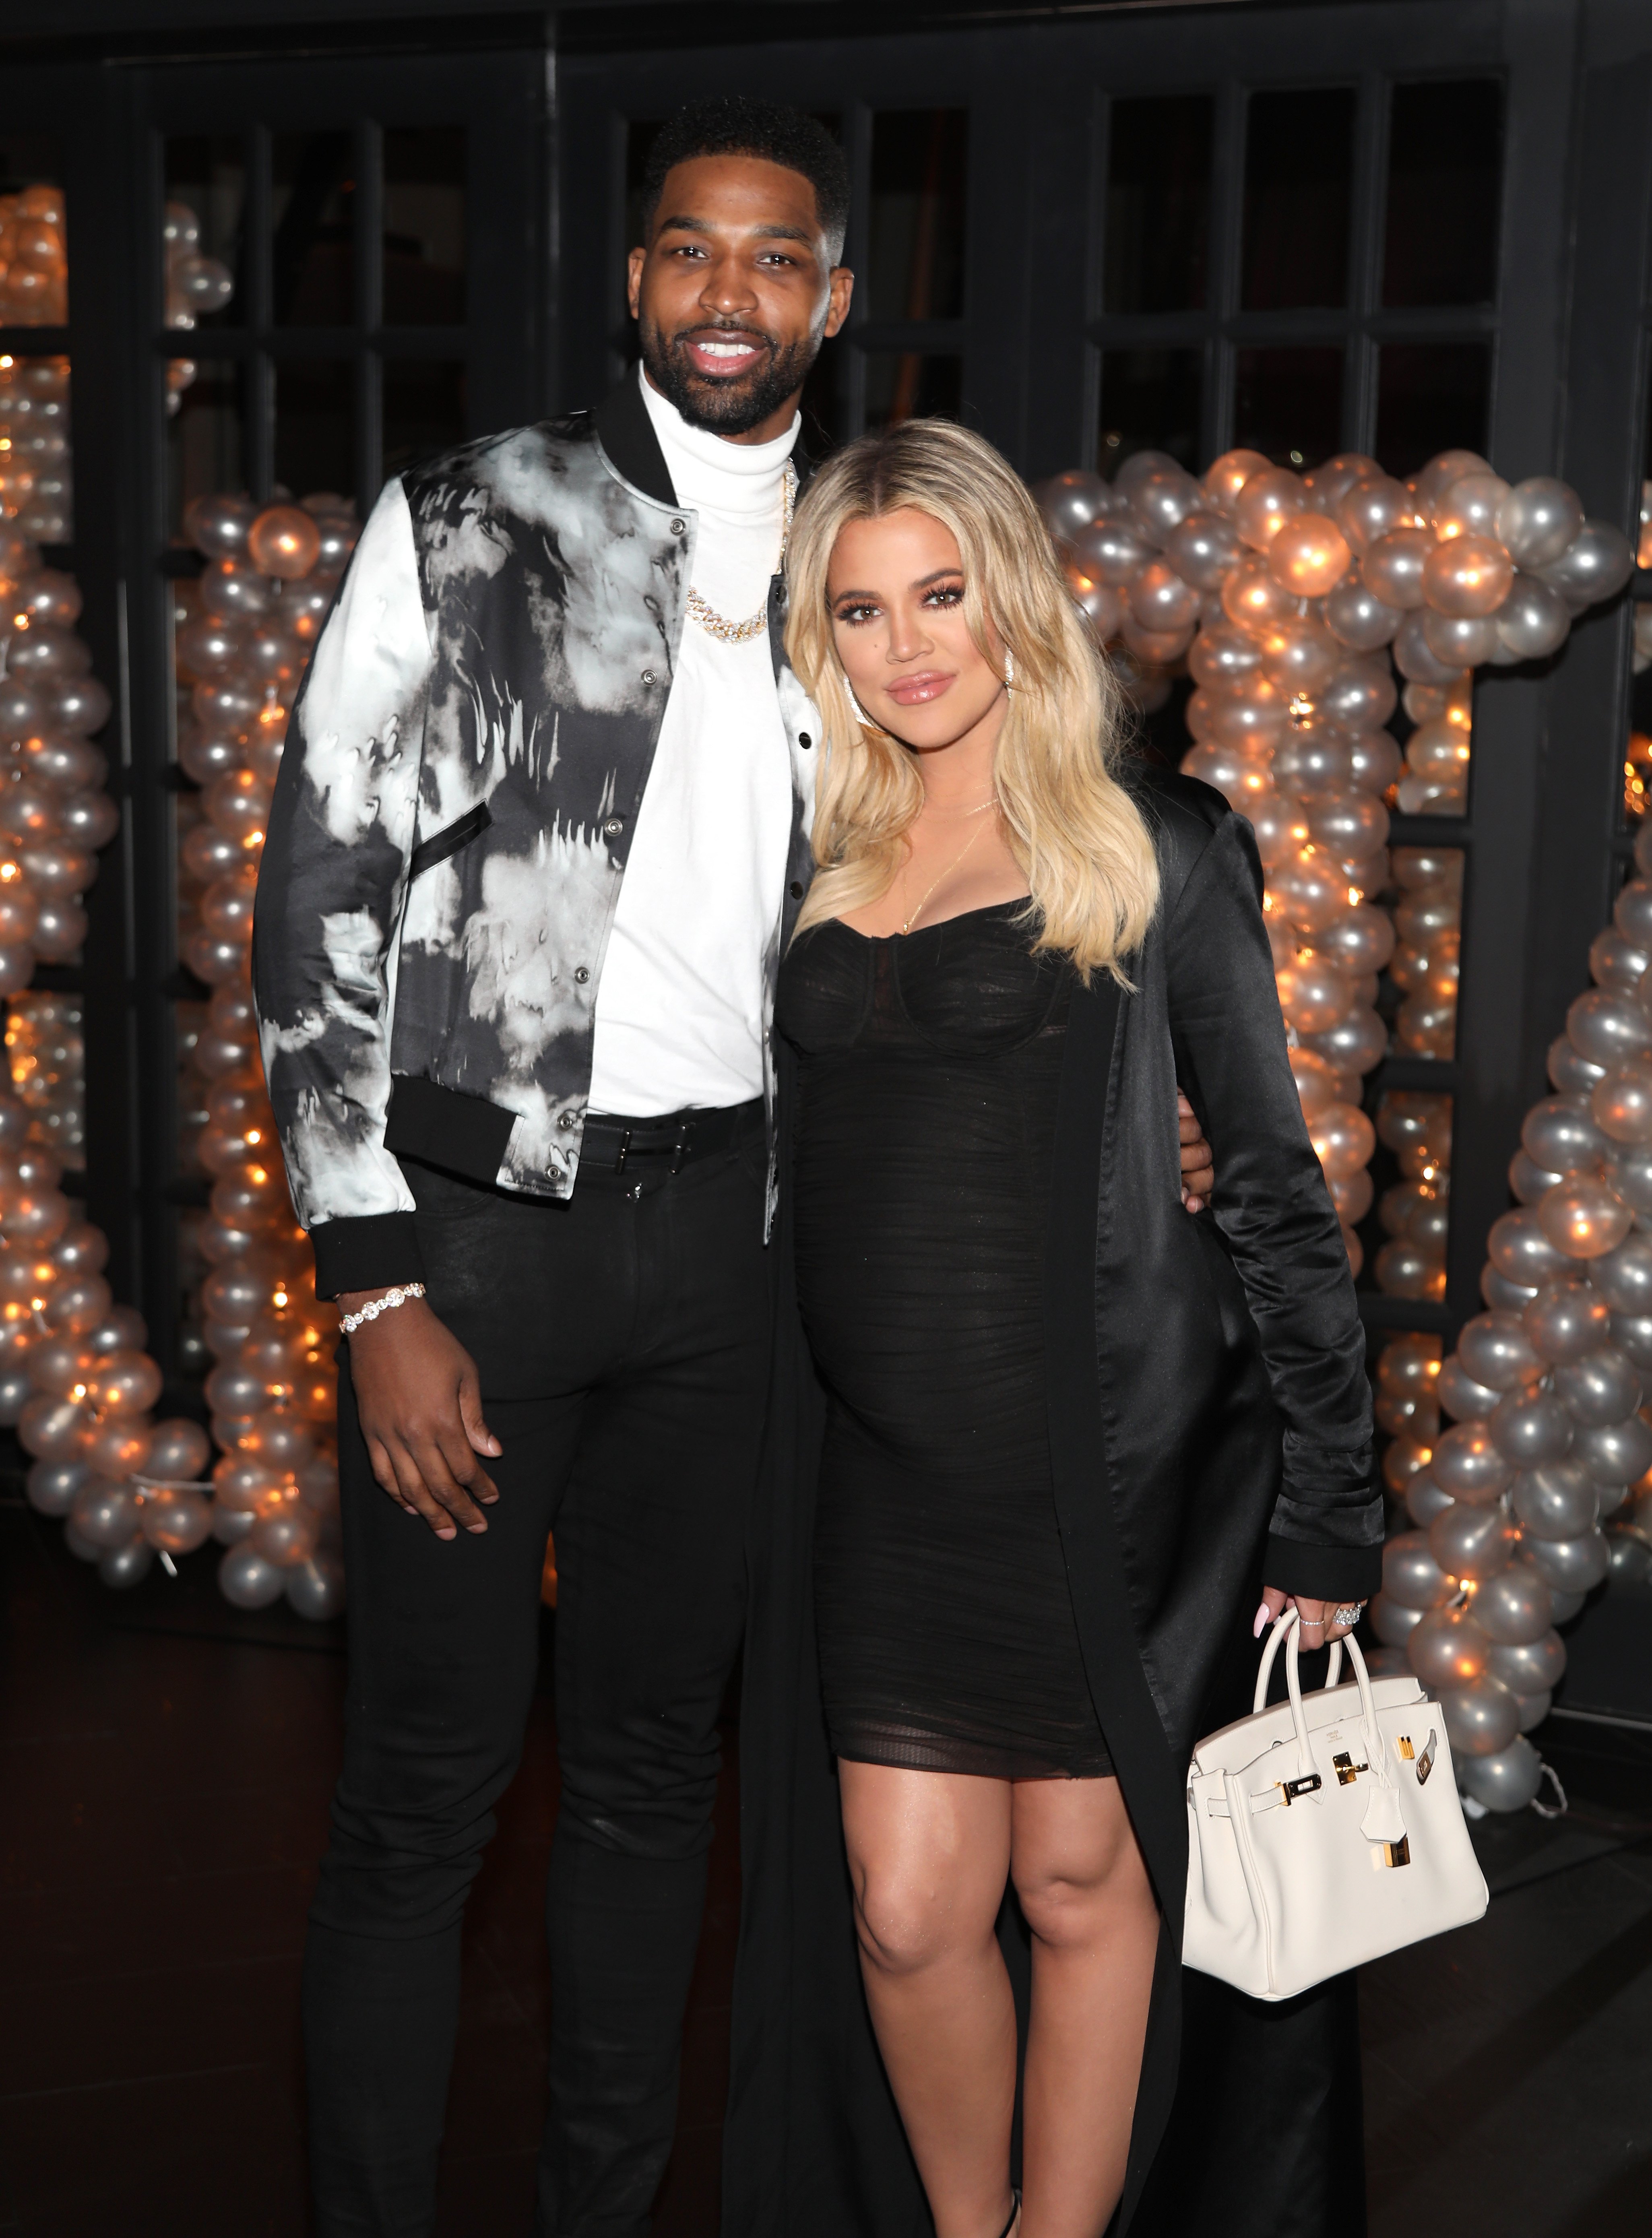 Tristan Thompson and Khloe Kardashian pose for a photo as Remy Martin celebrates Tristan Thompson's Birthday at Beauty & Essex on March 10, 2018. | Photo: GettyImages